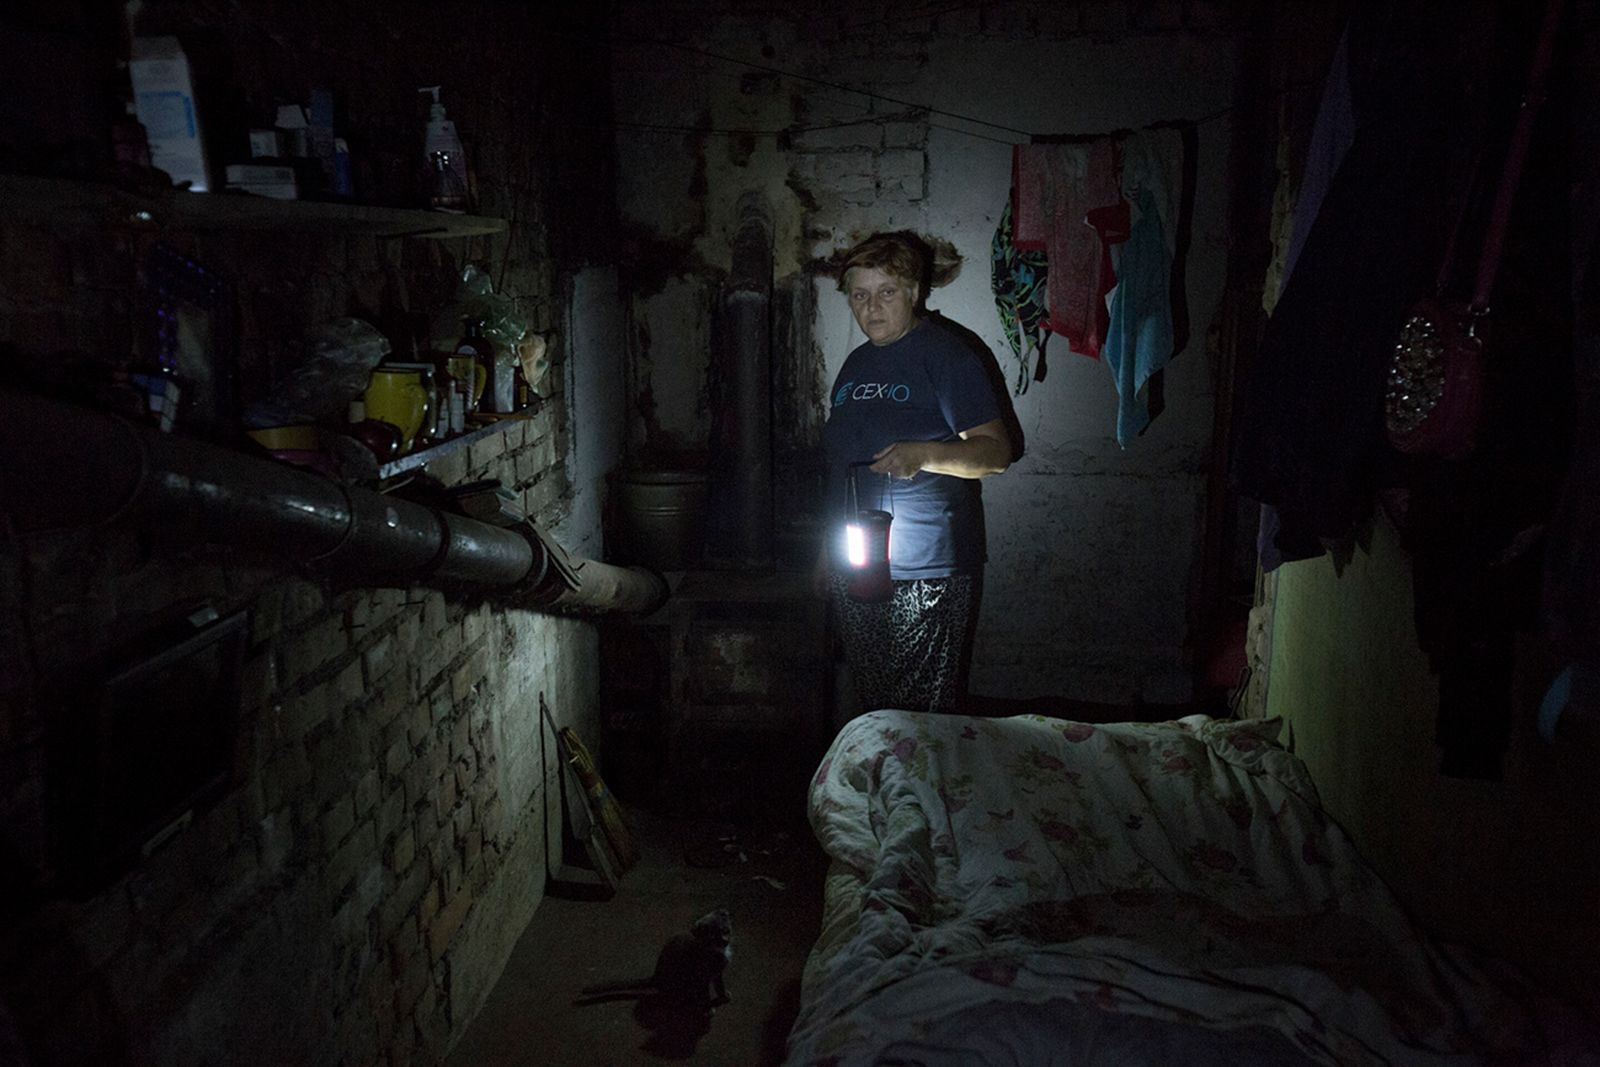 © Marek M Berezowski - Image from the Donbass. Aftermath. photography project